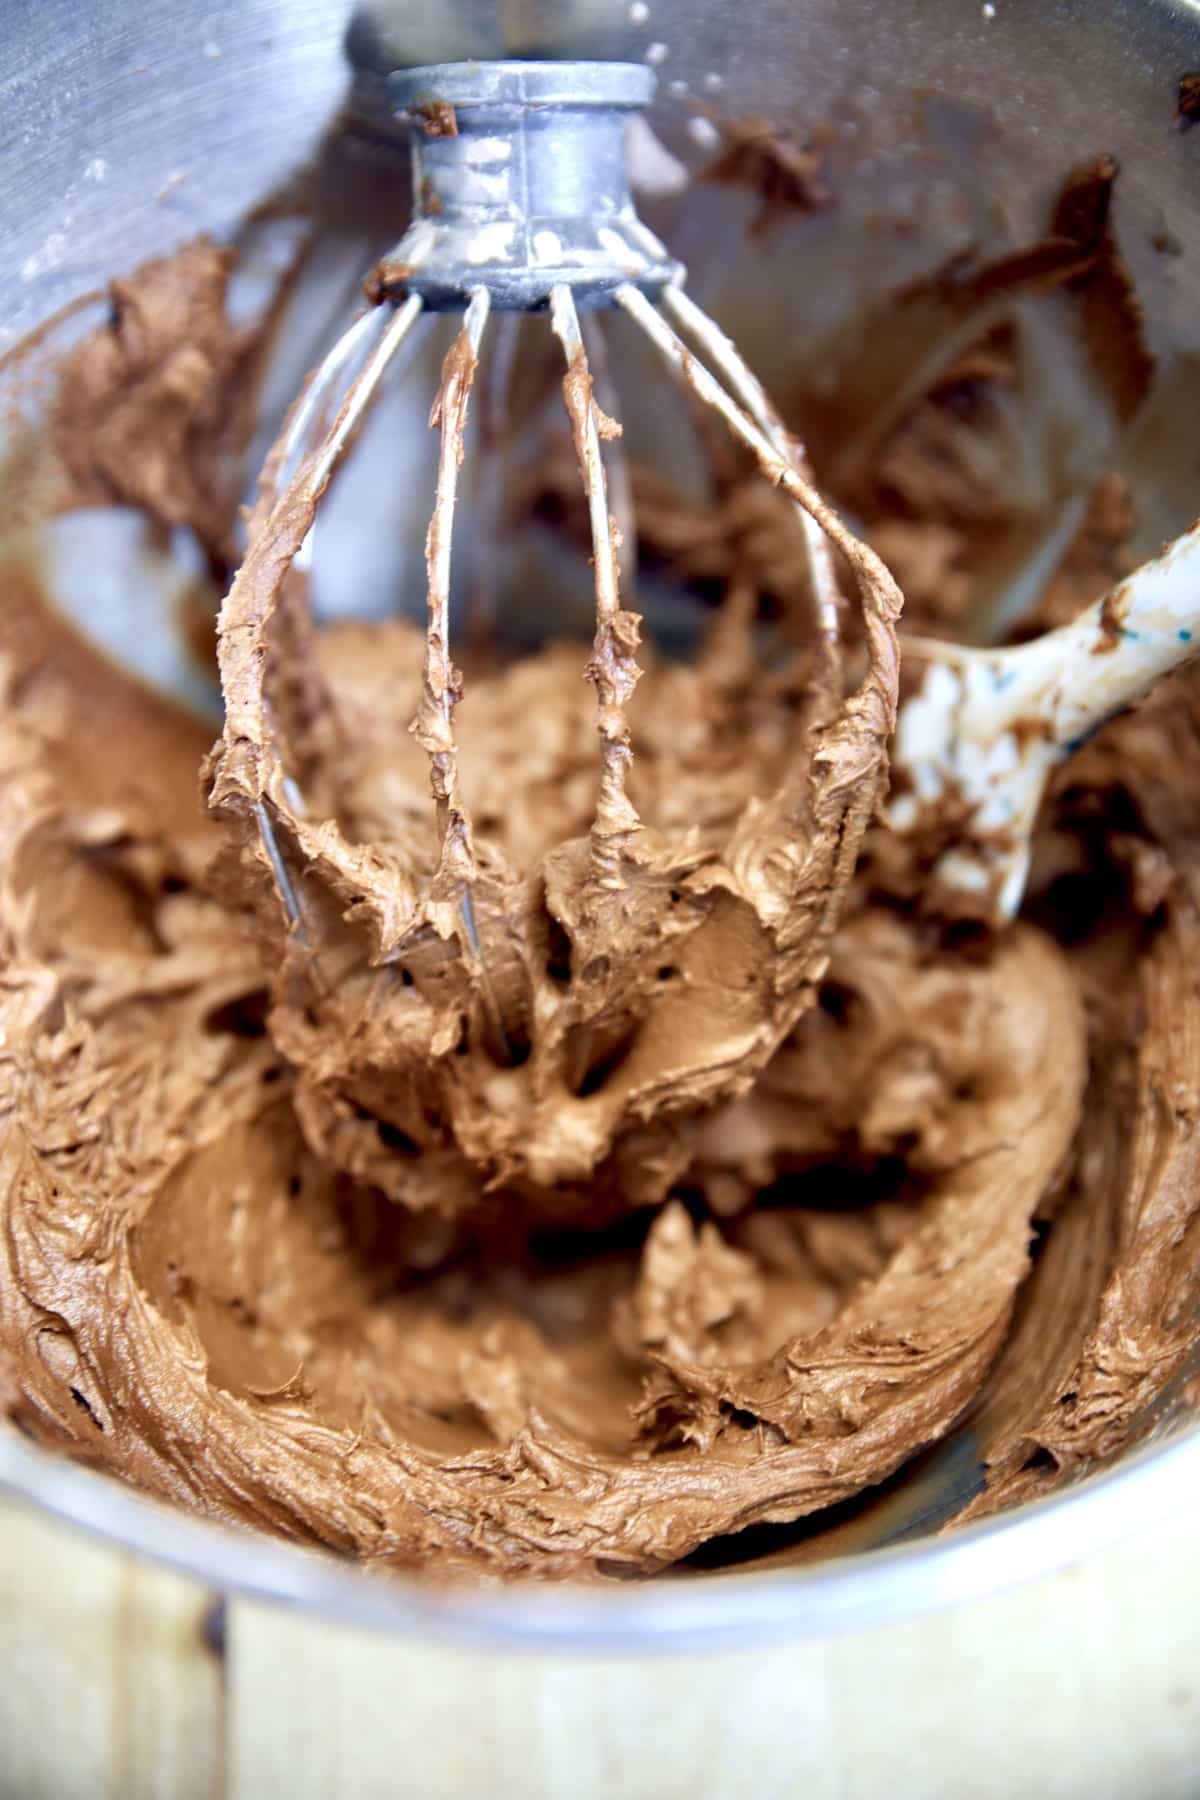 Chocolate Frosting on a mixer whisk.